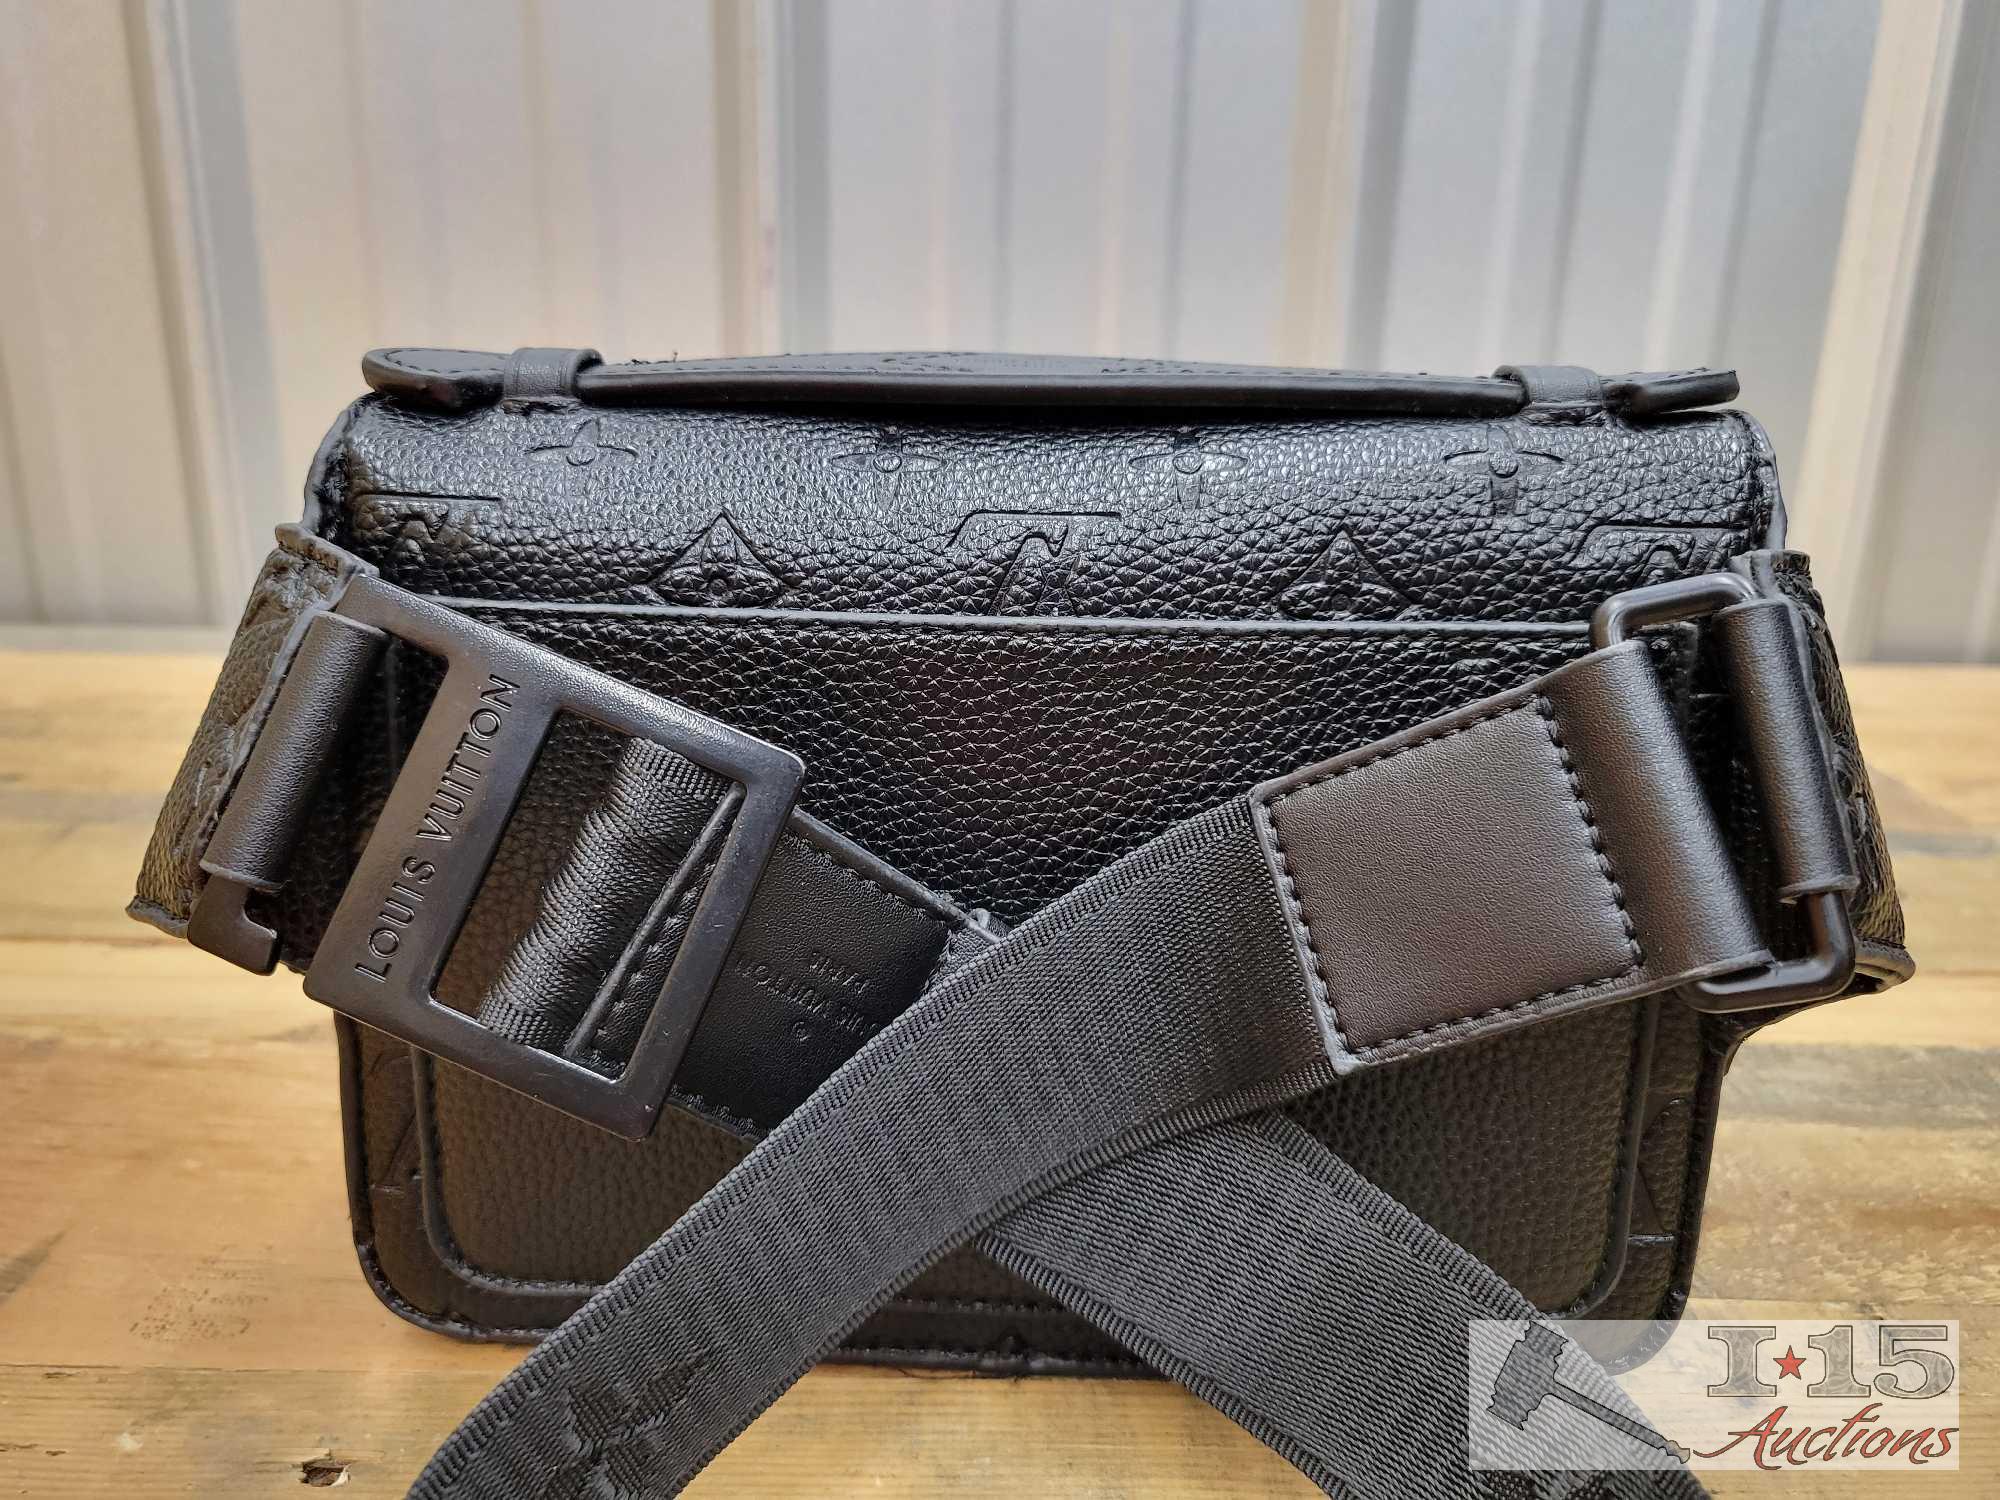 LV S lock sling bag - Anybody able to help with sourcing a good rep of  this? All the ones I've found on D8 are too shiny and not Matt effect. 